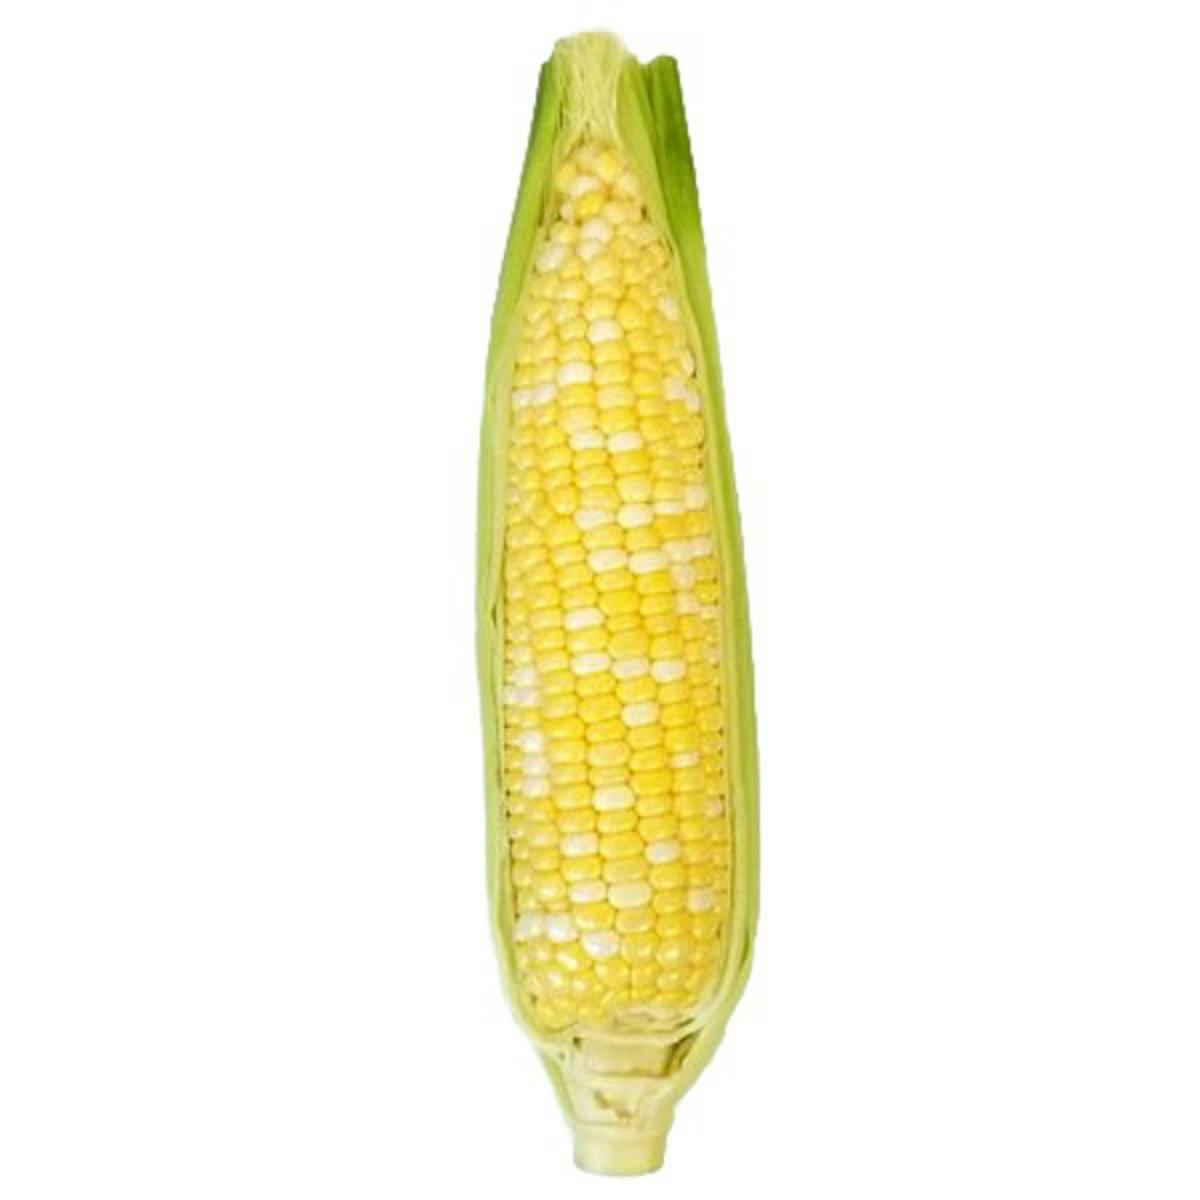 grilled ears corn (about 3 cups)